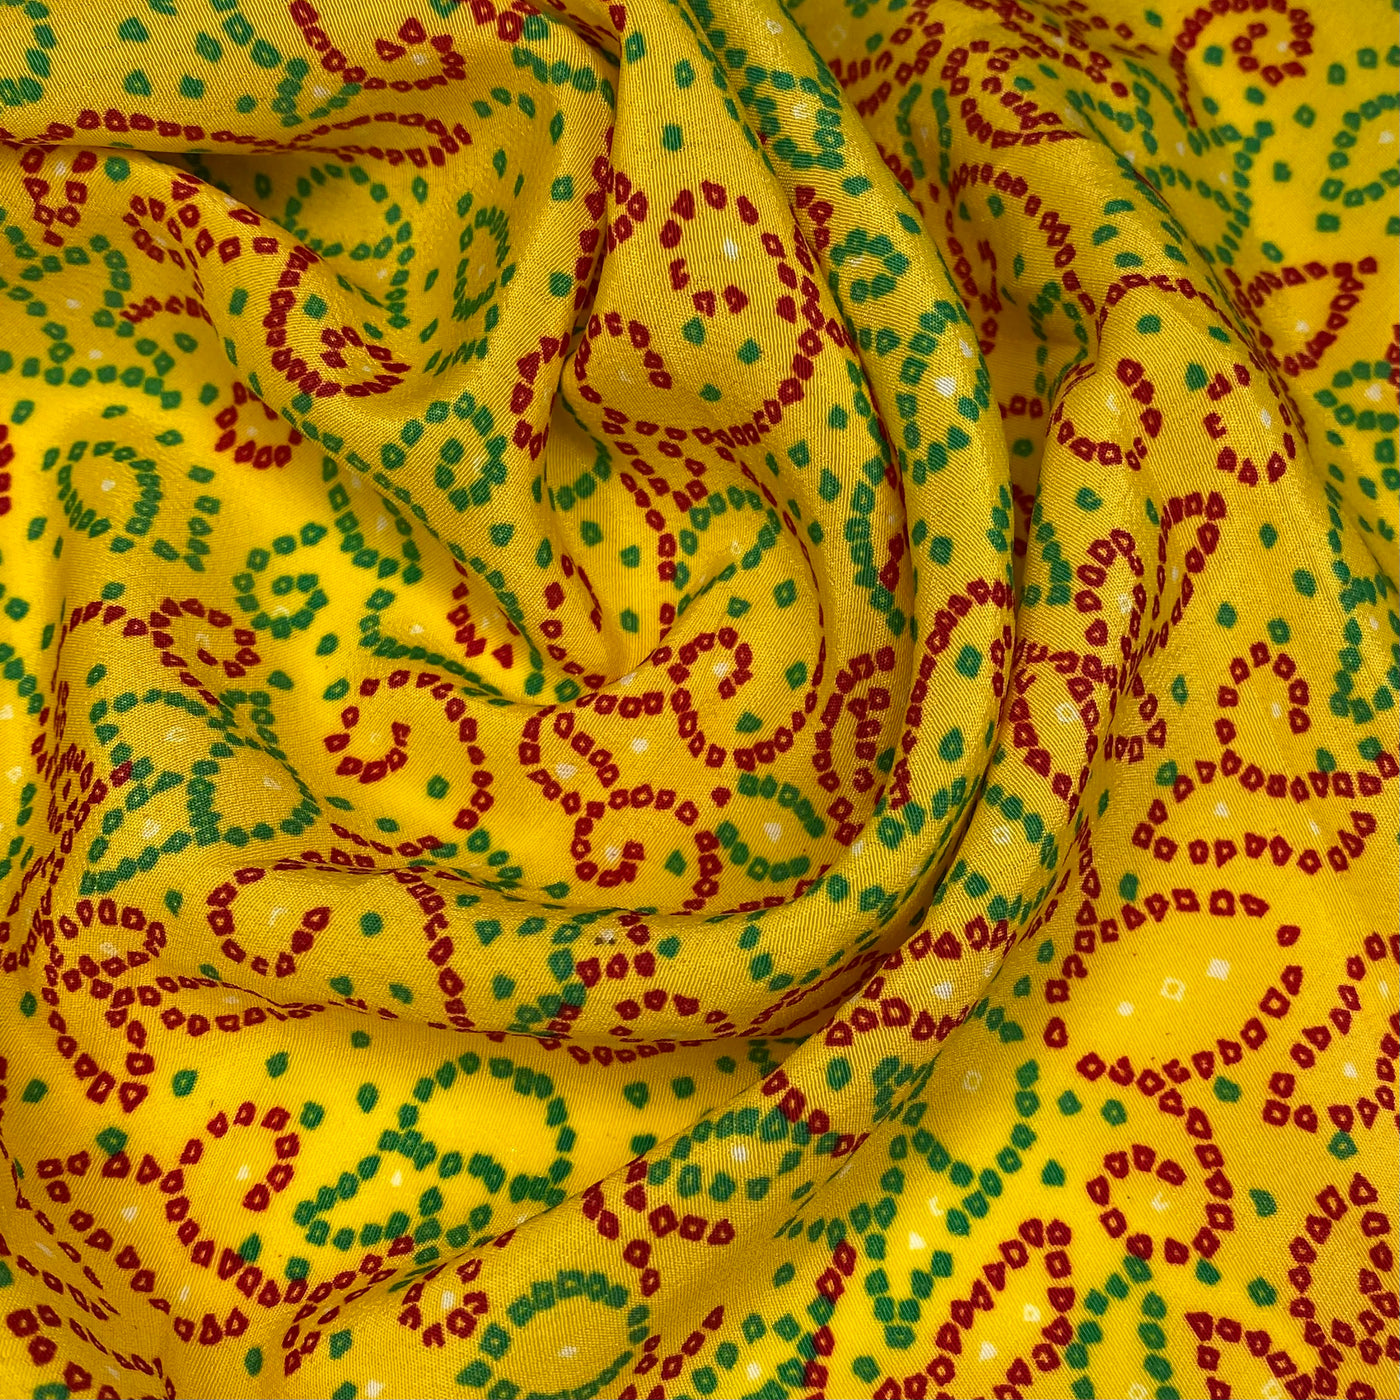 Floral Printed Polyester - 44” - Yellow/Red/Green